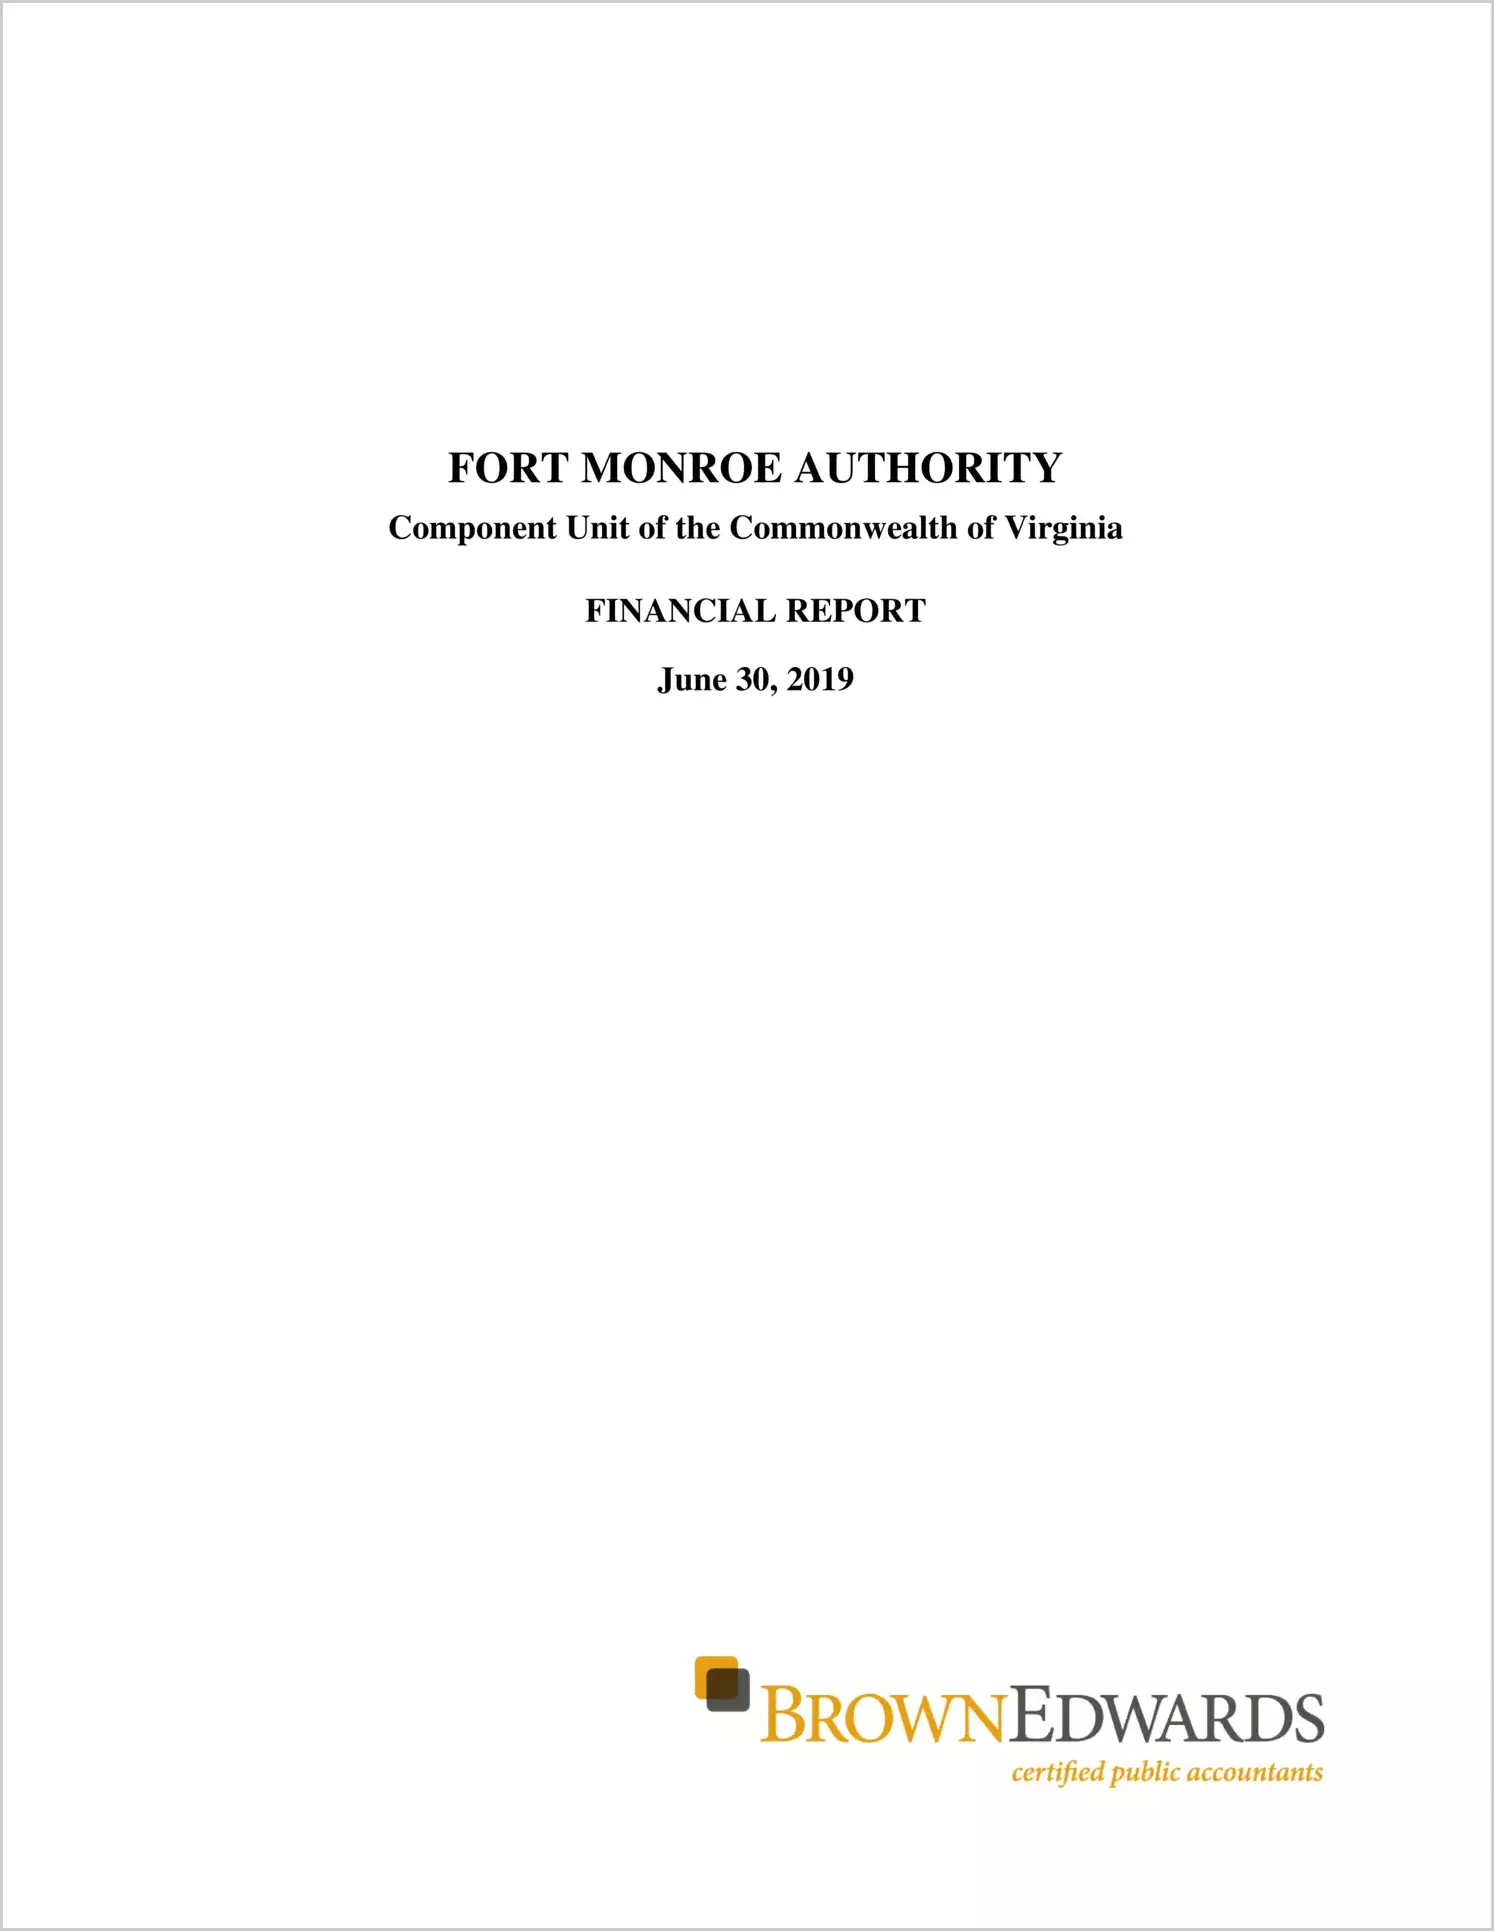 Fort Monroe Authority for the year ended June 30, 2019